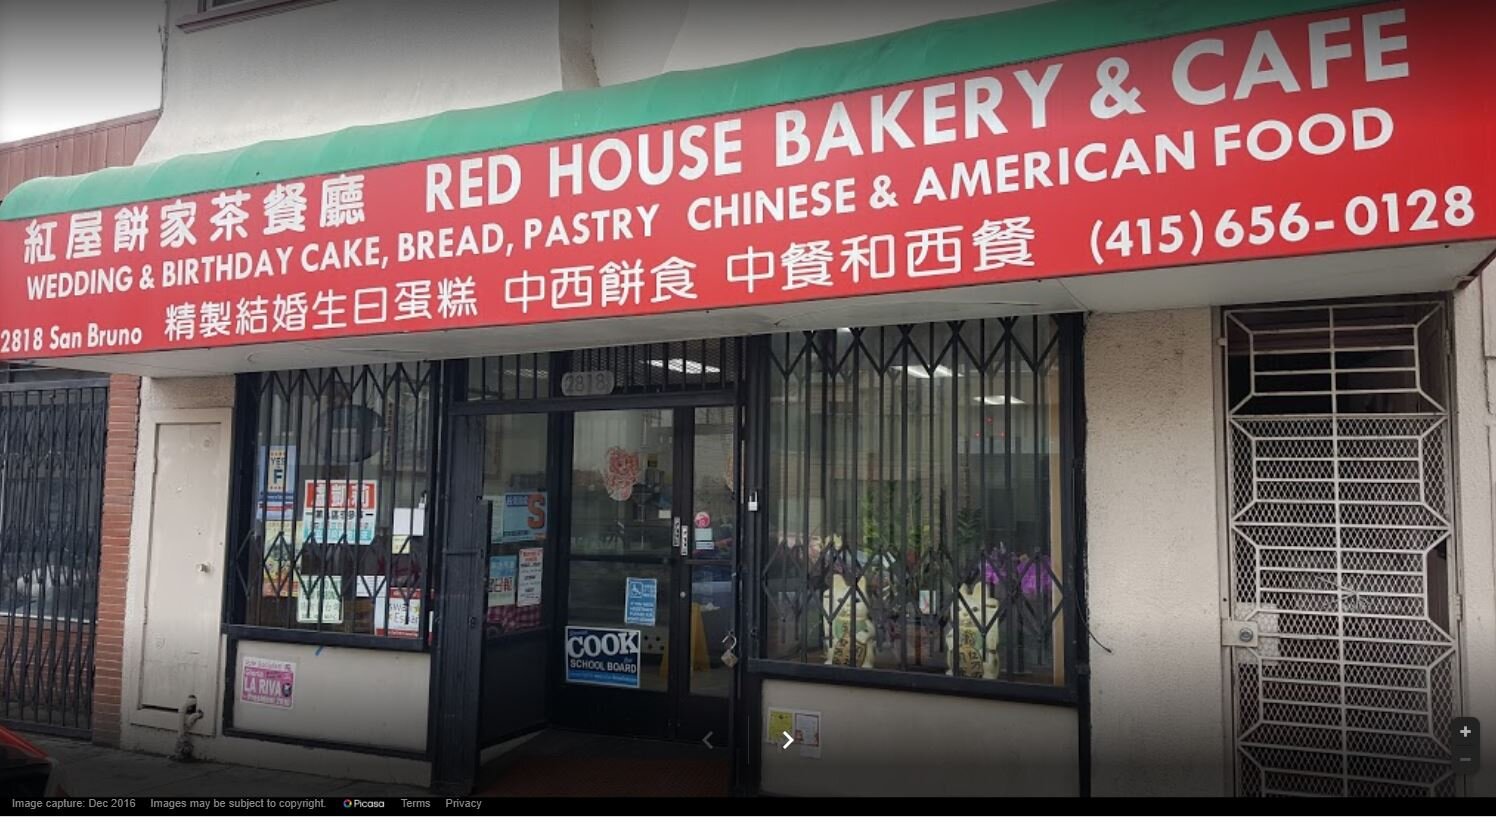 Red House Bakery